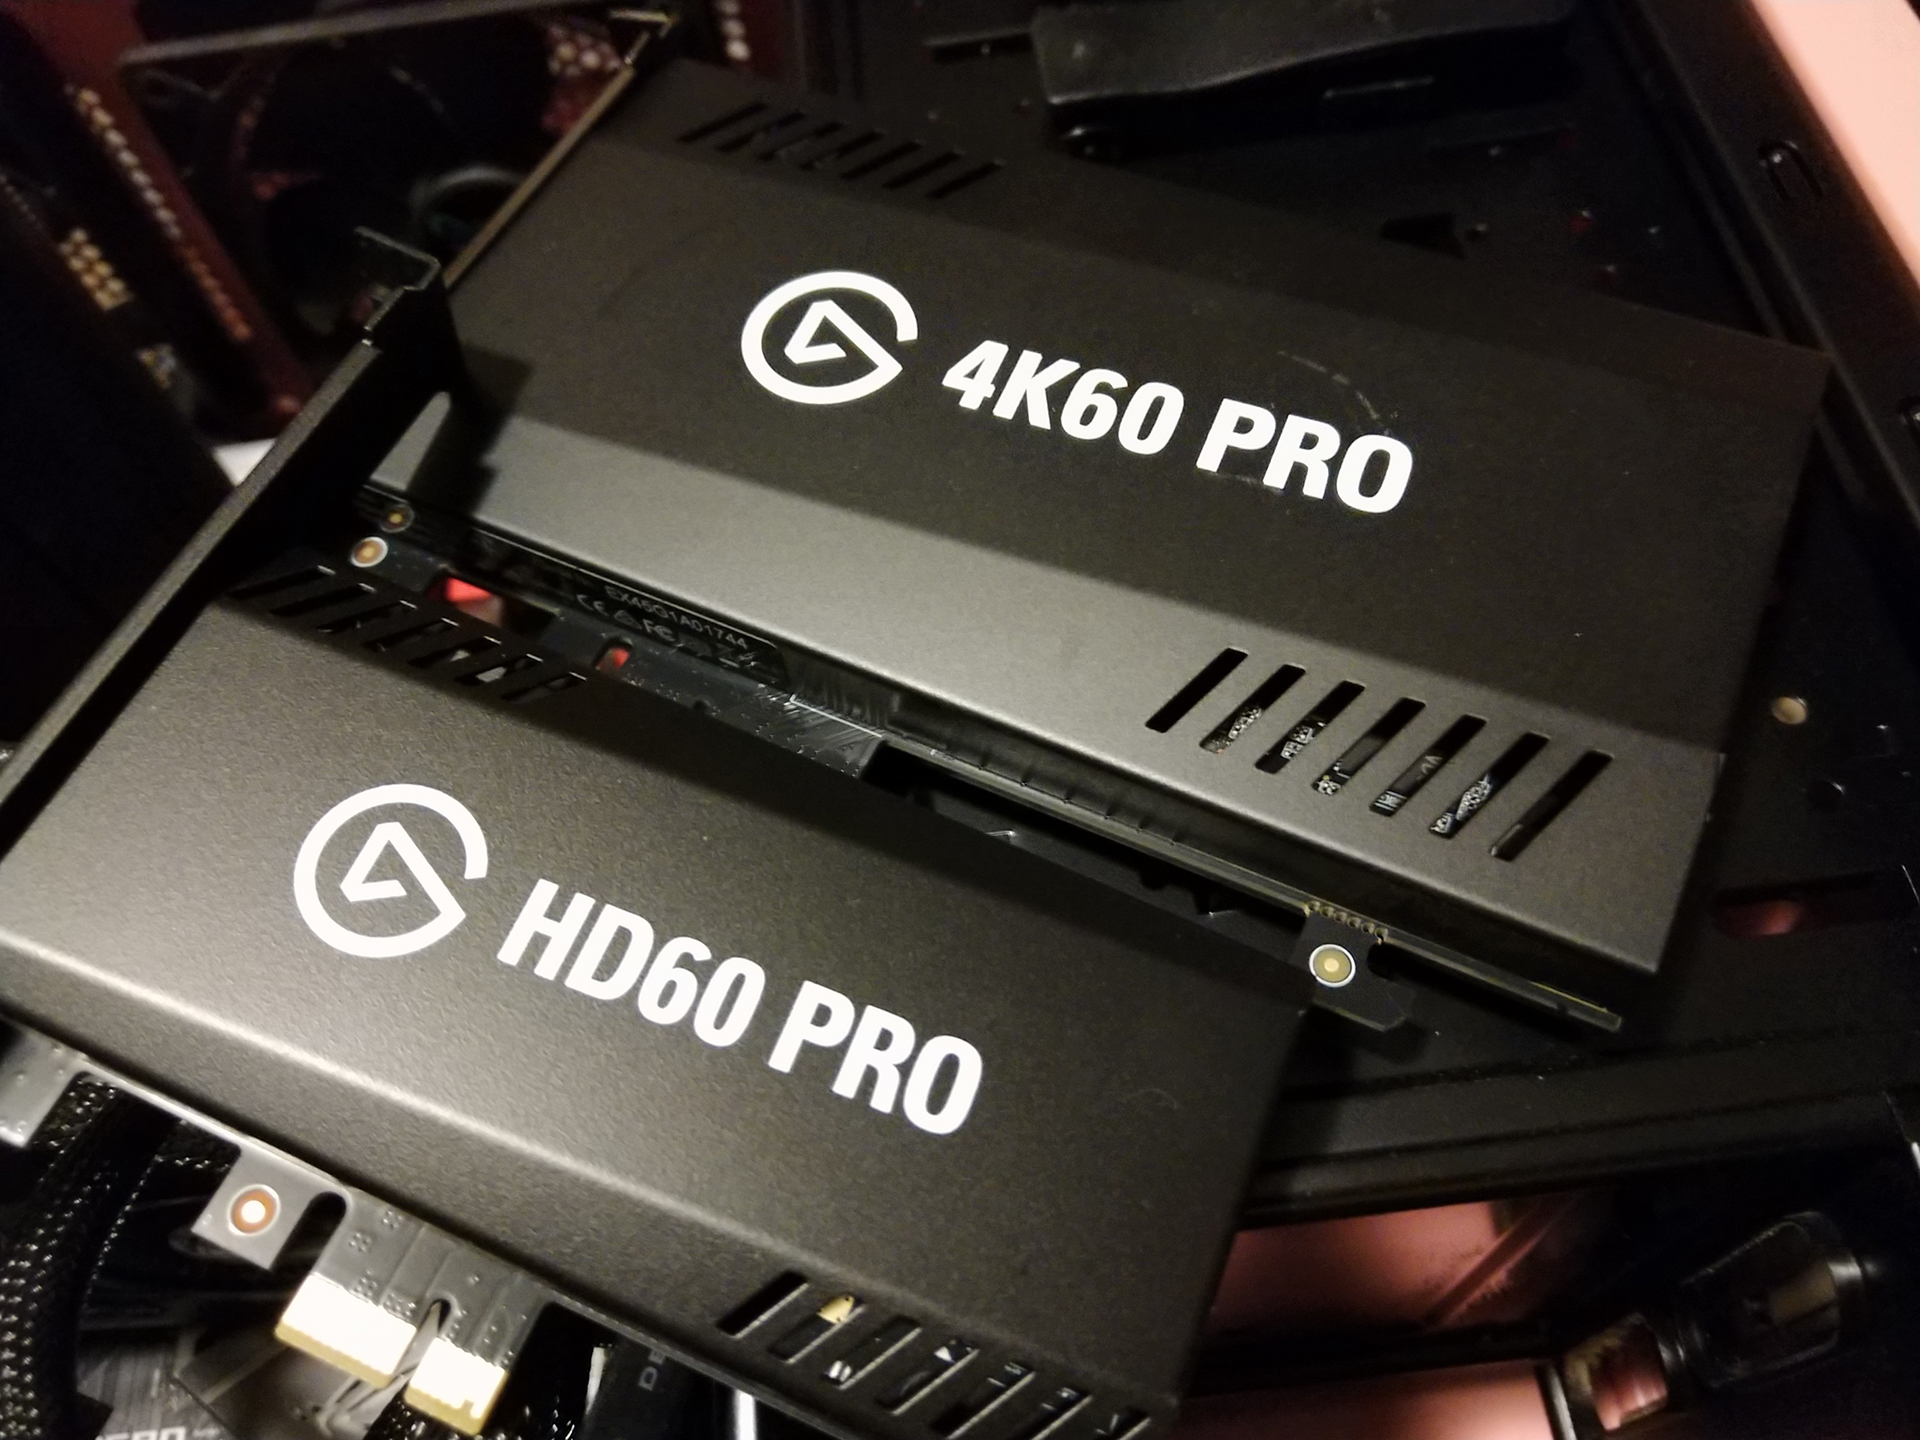 New Capture Card Records 4K 60fps Video, If Your PC Can Handle It